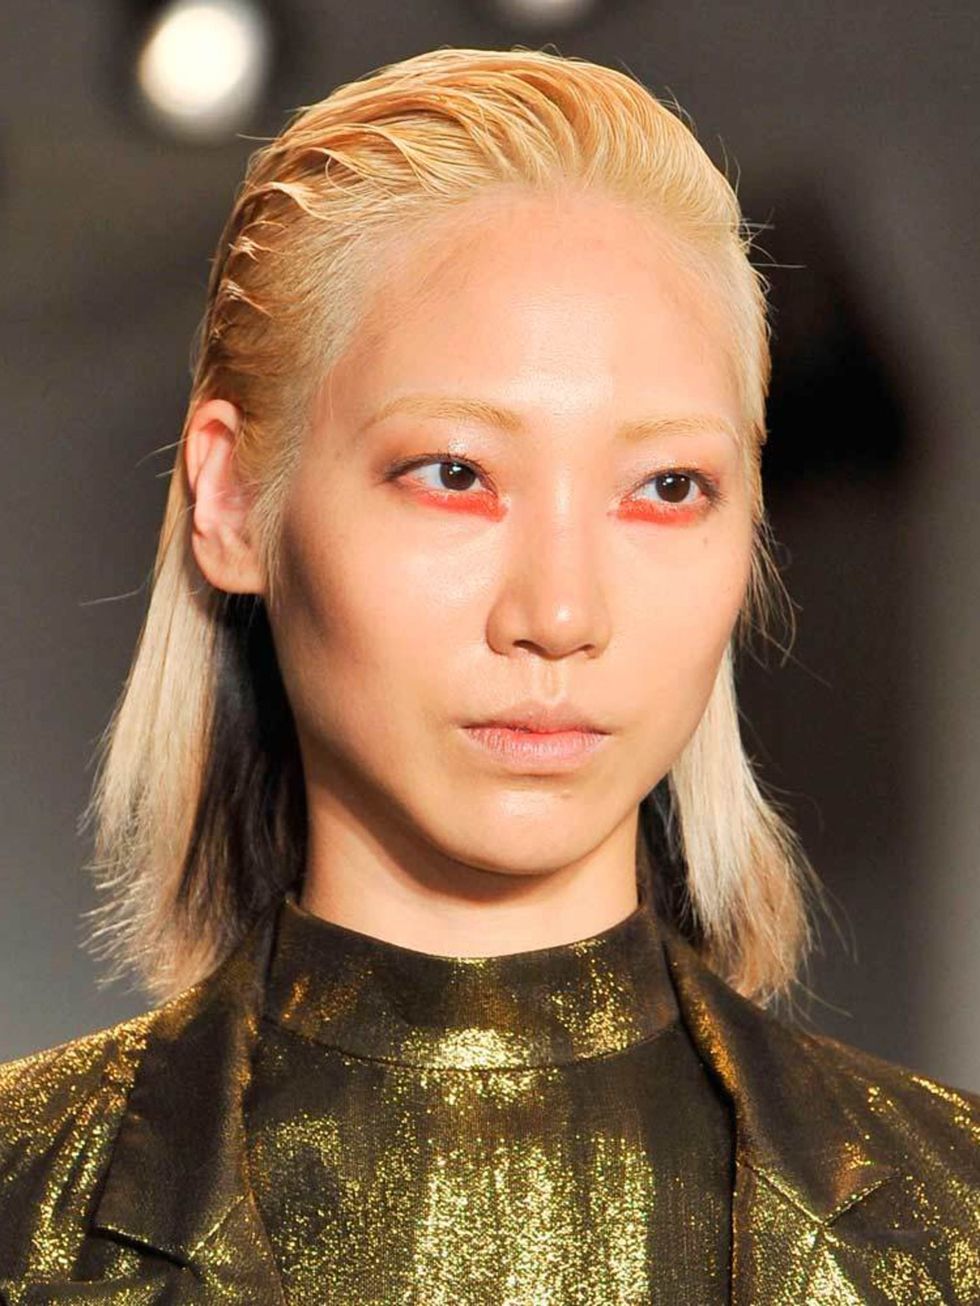 <p><a href="http://www.elleuk.com/catwalk/peter-som/spring-summer-2015">Peter Som</a></p>

<p>The Look: Futuristic Neon</p>

<p>Make-up Artist: Yadim for Maybelline</p>

<p>Key product: Neon pigment and <a href="http://www.boots.com/en/Maybelline-Baby-Ski